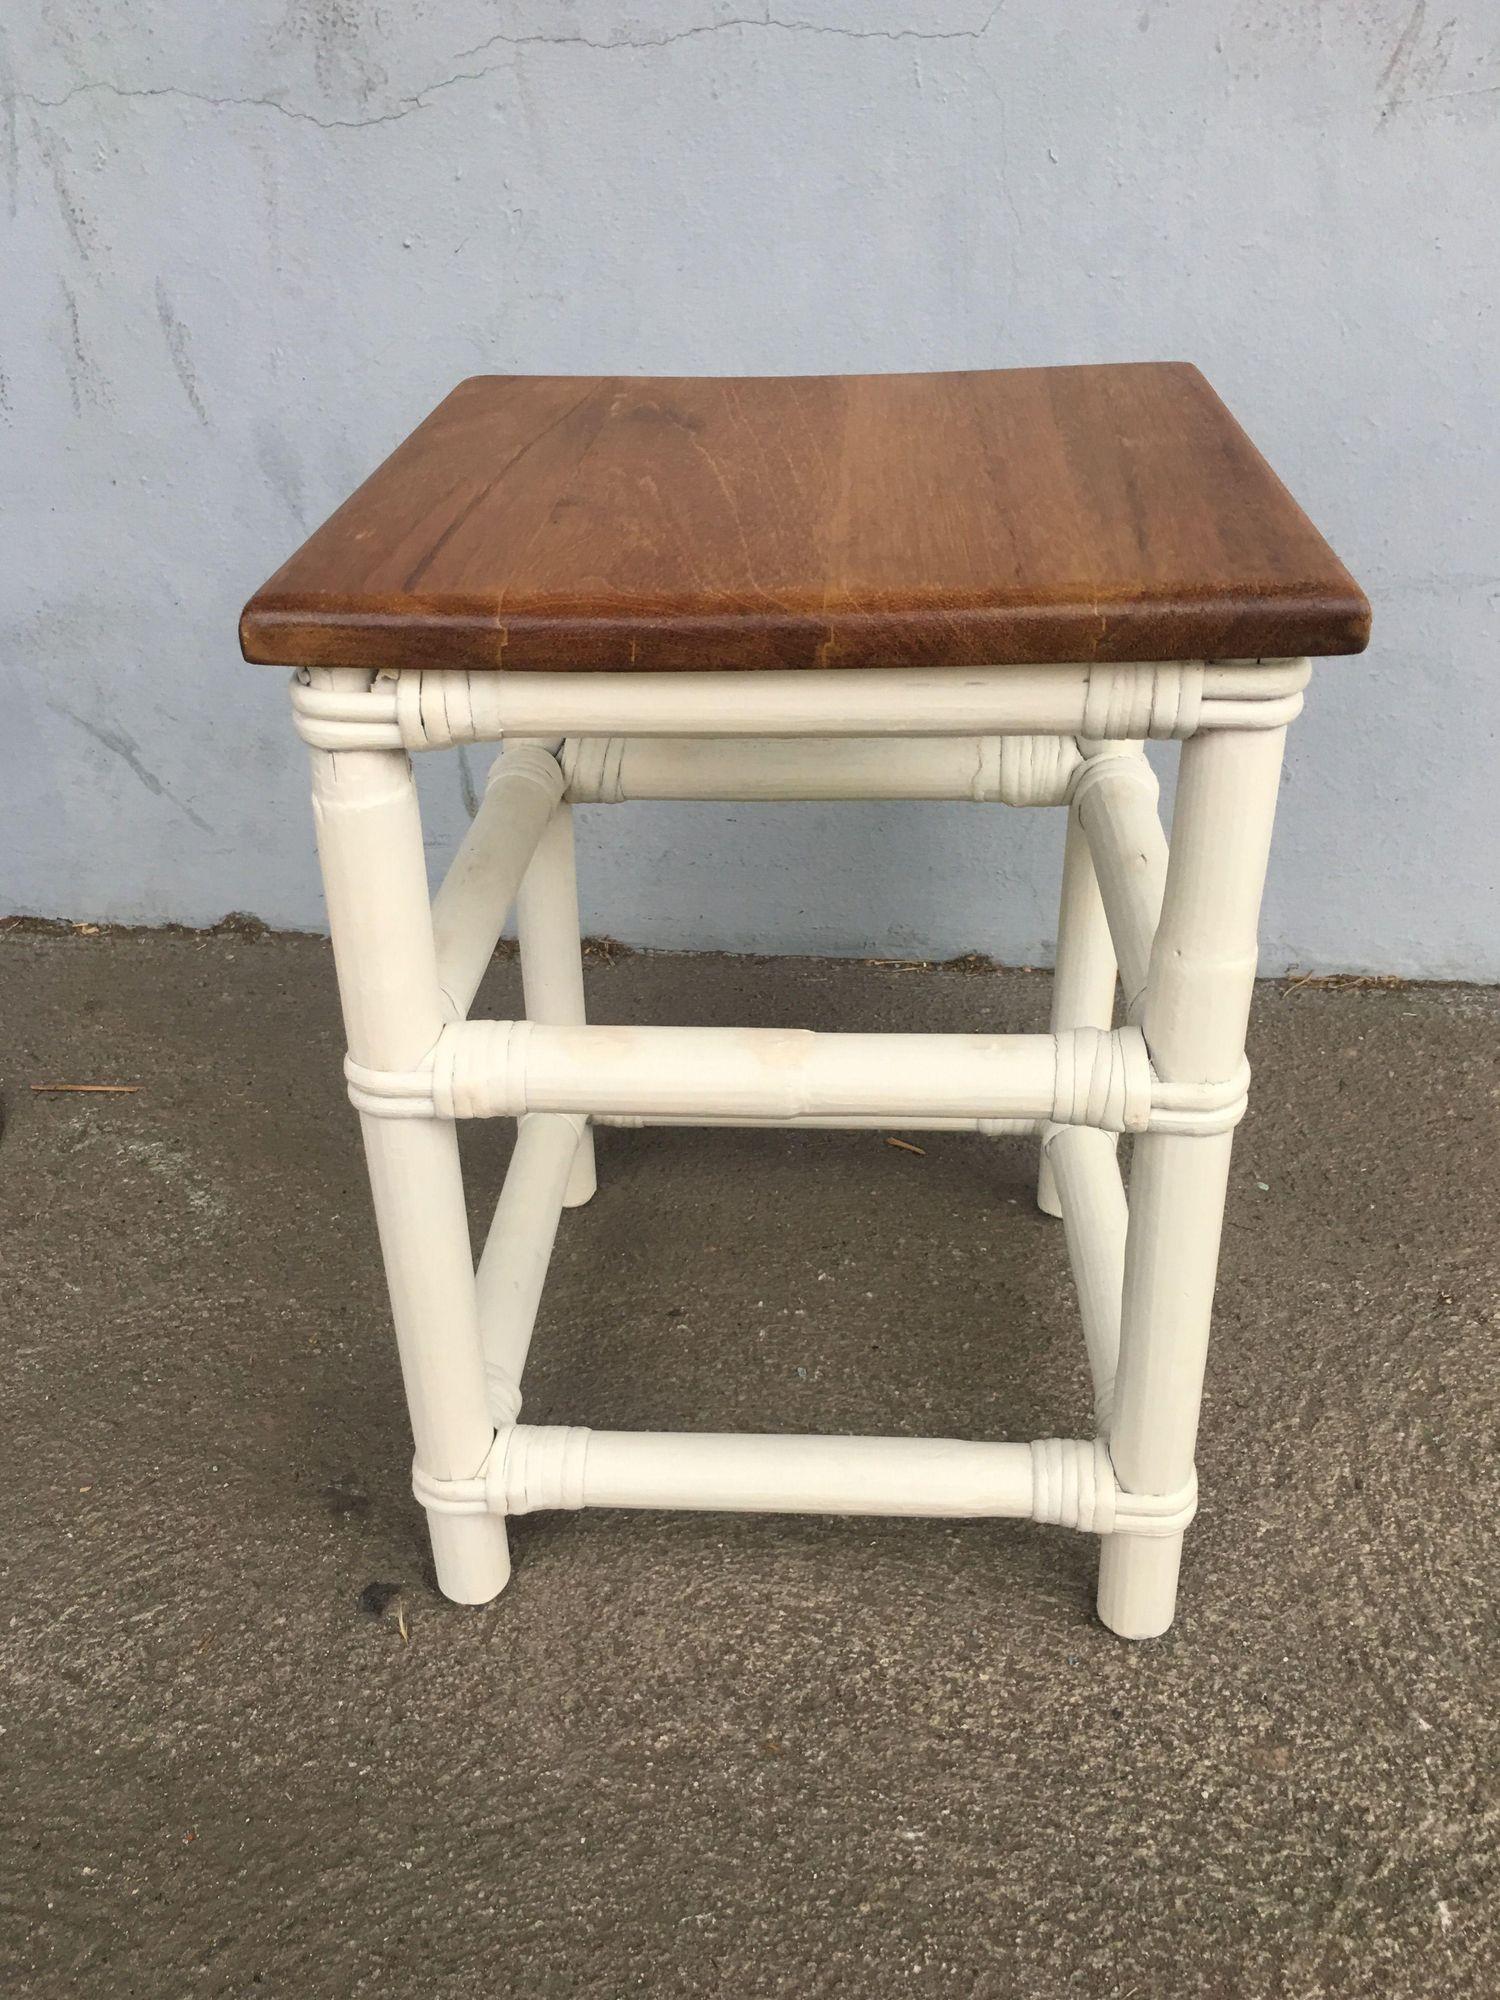 Original 1950s 1-strand rattan drink side table with a Mahogany top. The table features wicker-wrapped accents with white painted rattan legs. All rattan, bamboo, and wicker furniture has been painstakingly refurbished to the highest standards with